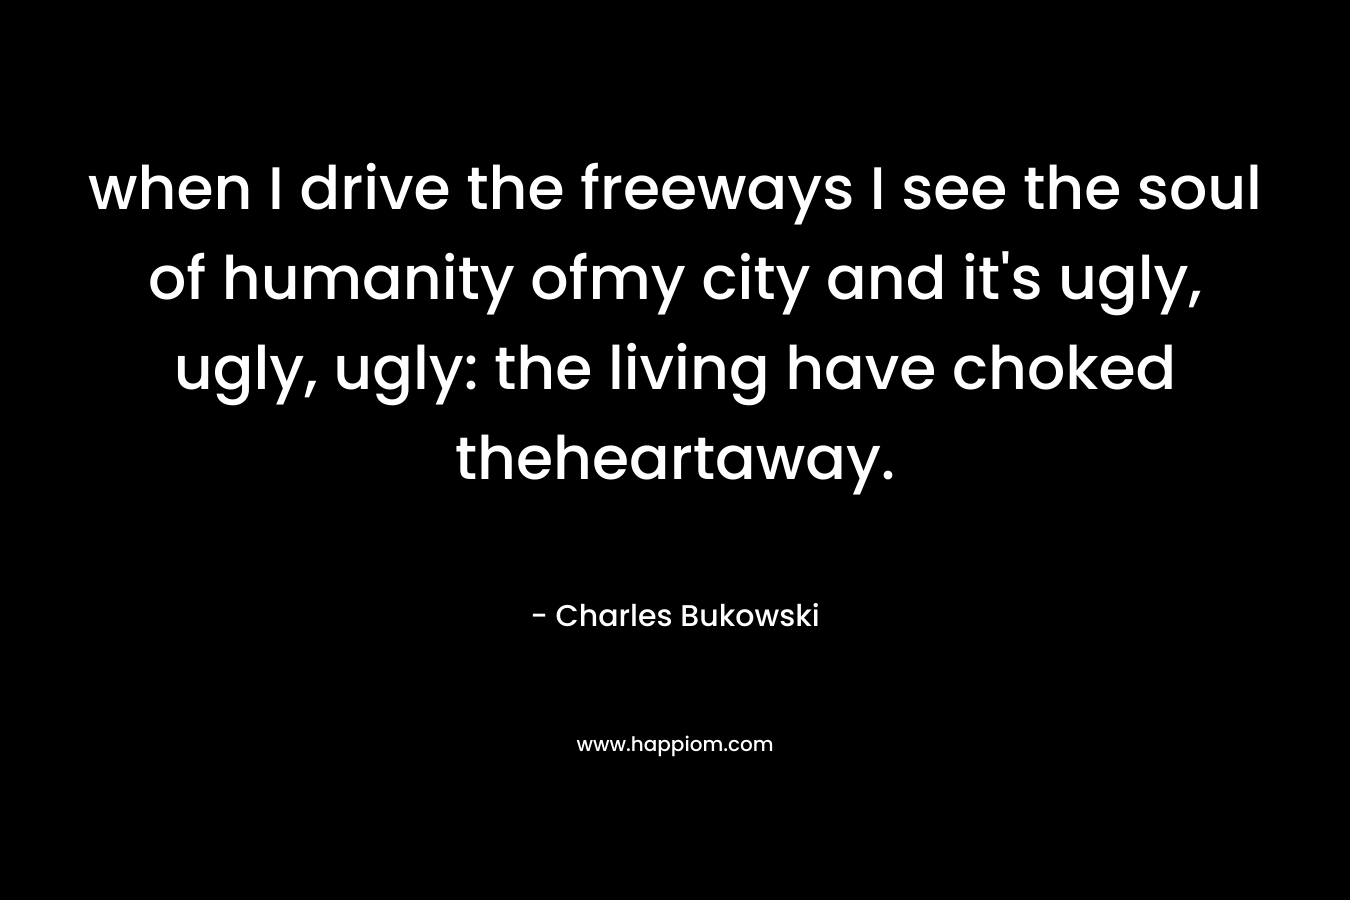 when I drive the freeways I see the soul of humanity ofmy city and it's ugly, ugly, ugly: the living have choked theheartaway.